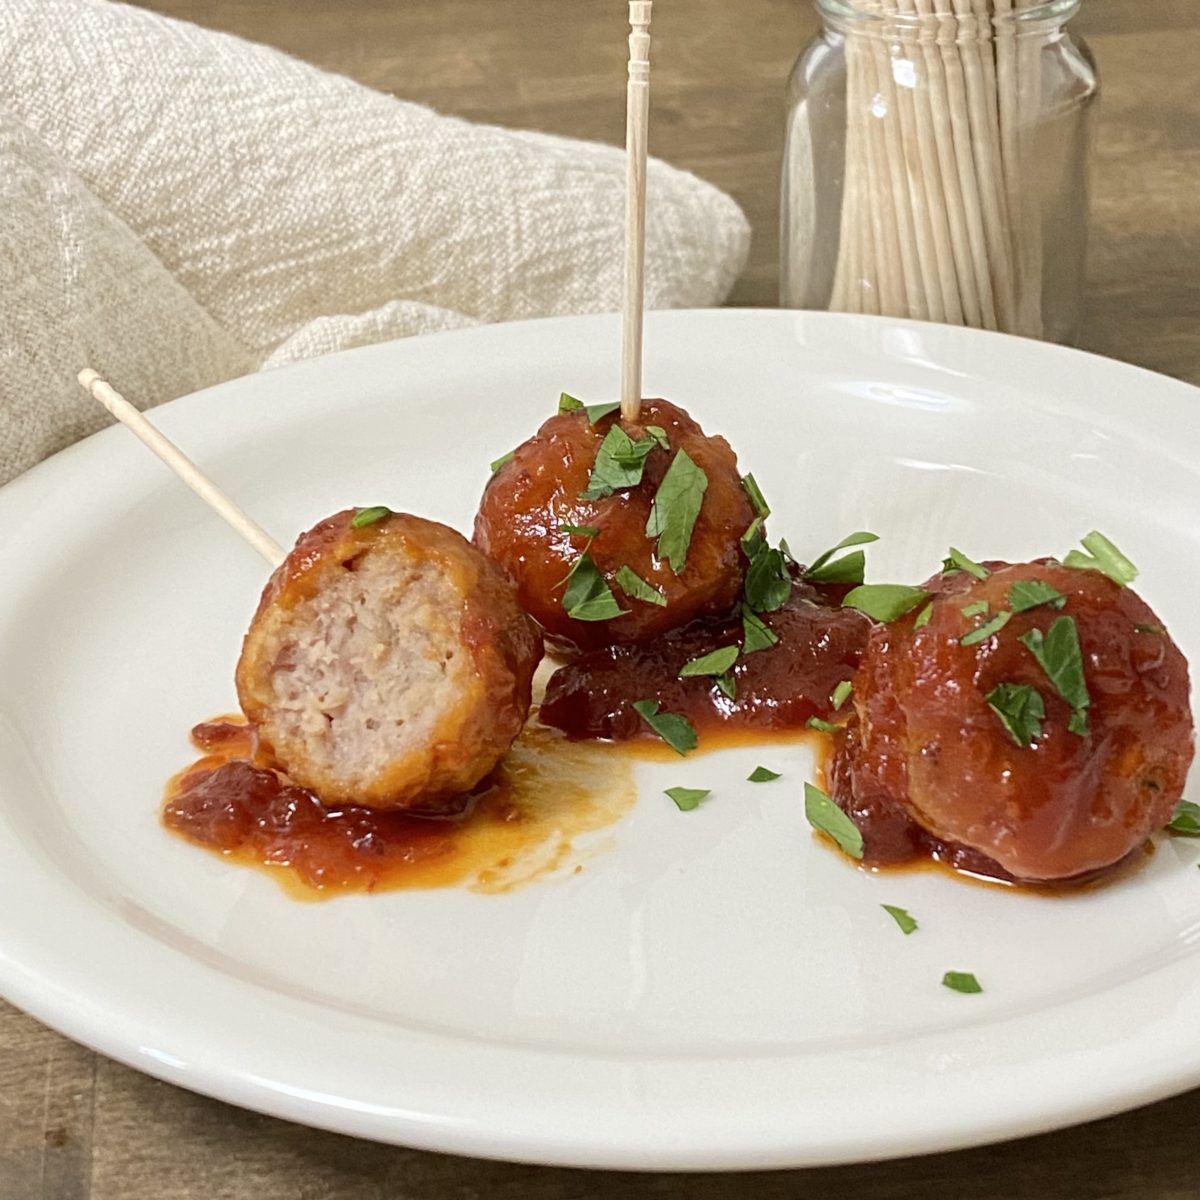 Meatballs on an appetizer plate with toothpicks.